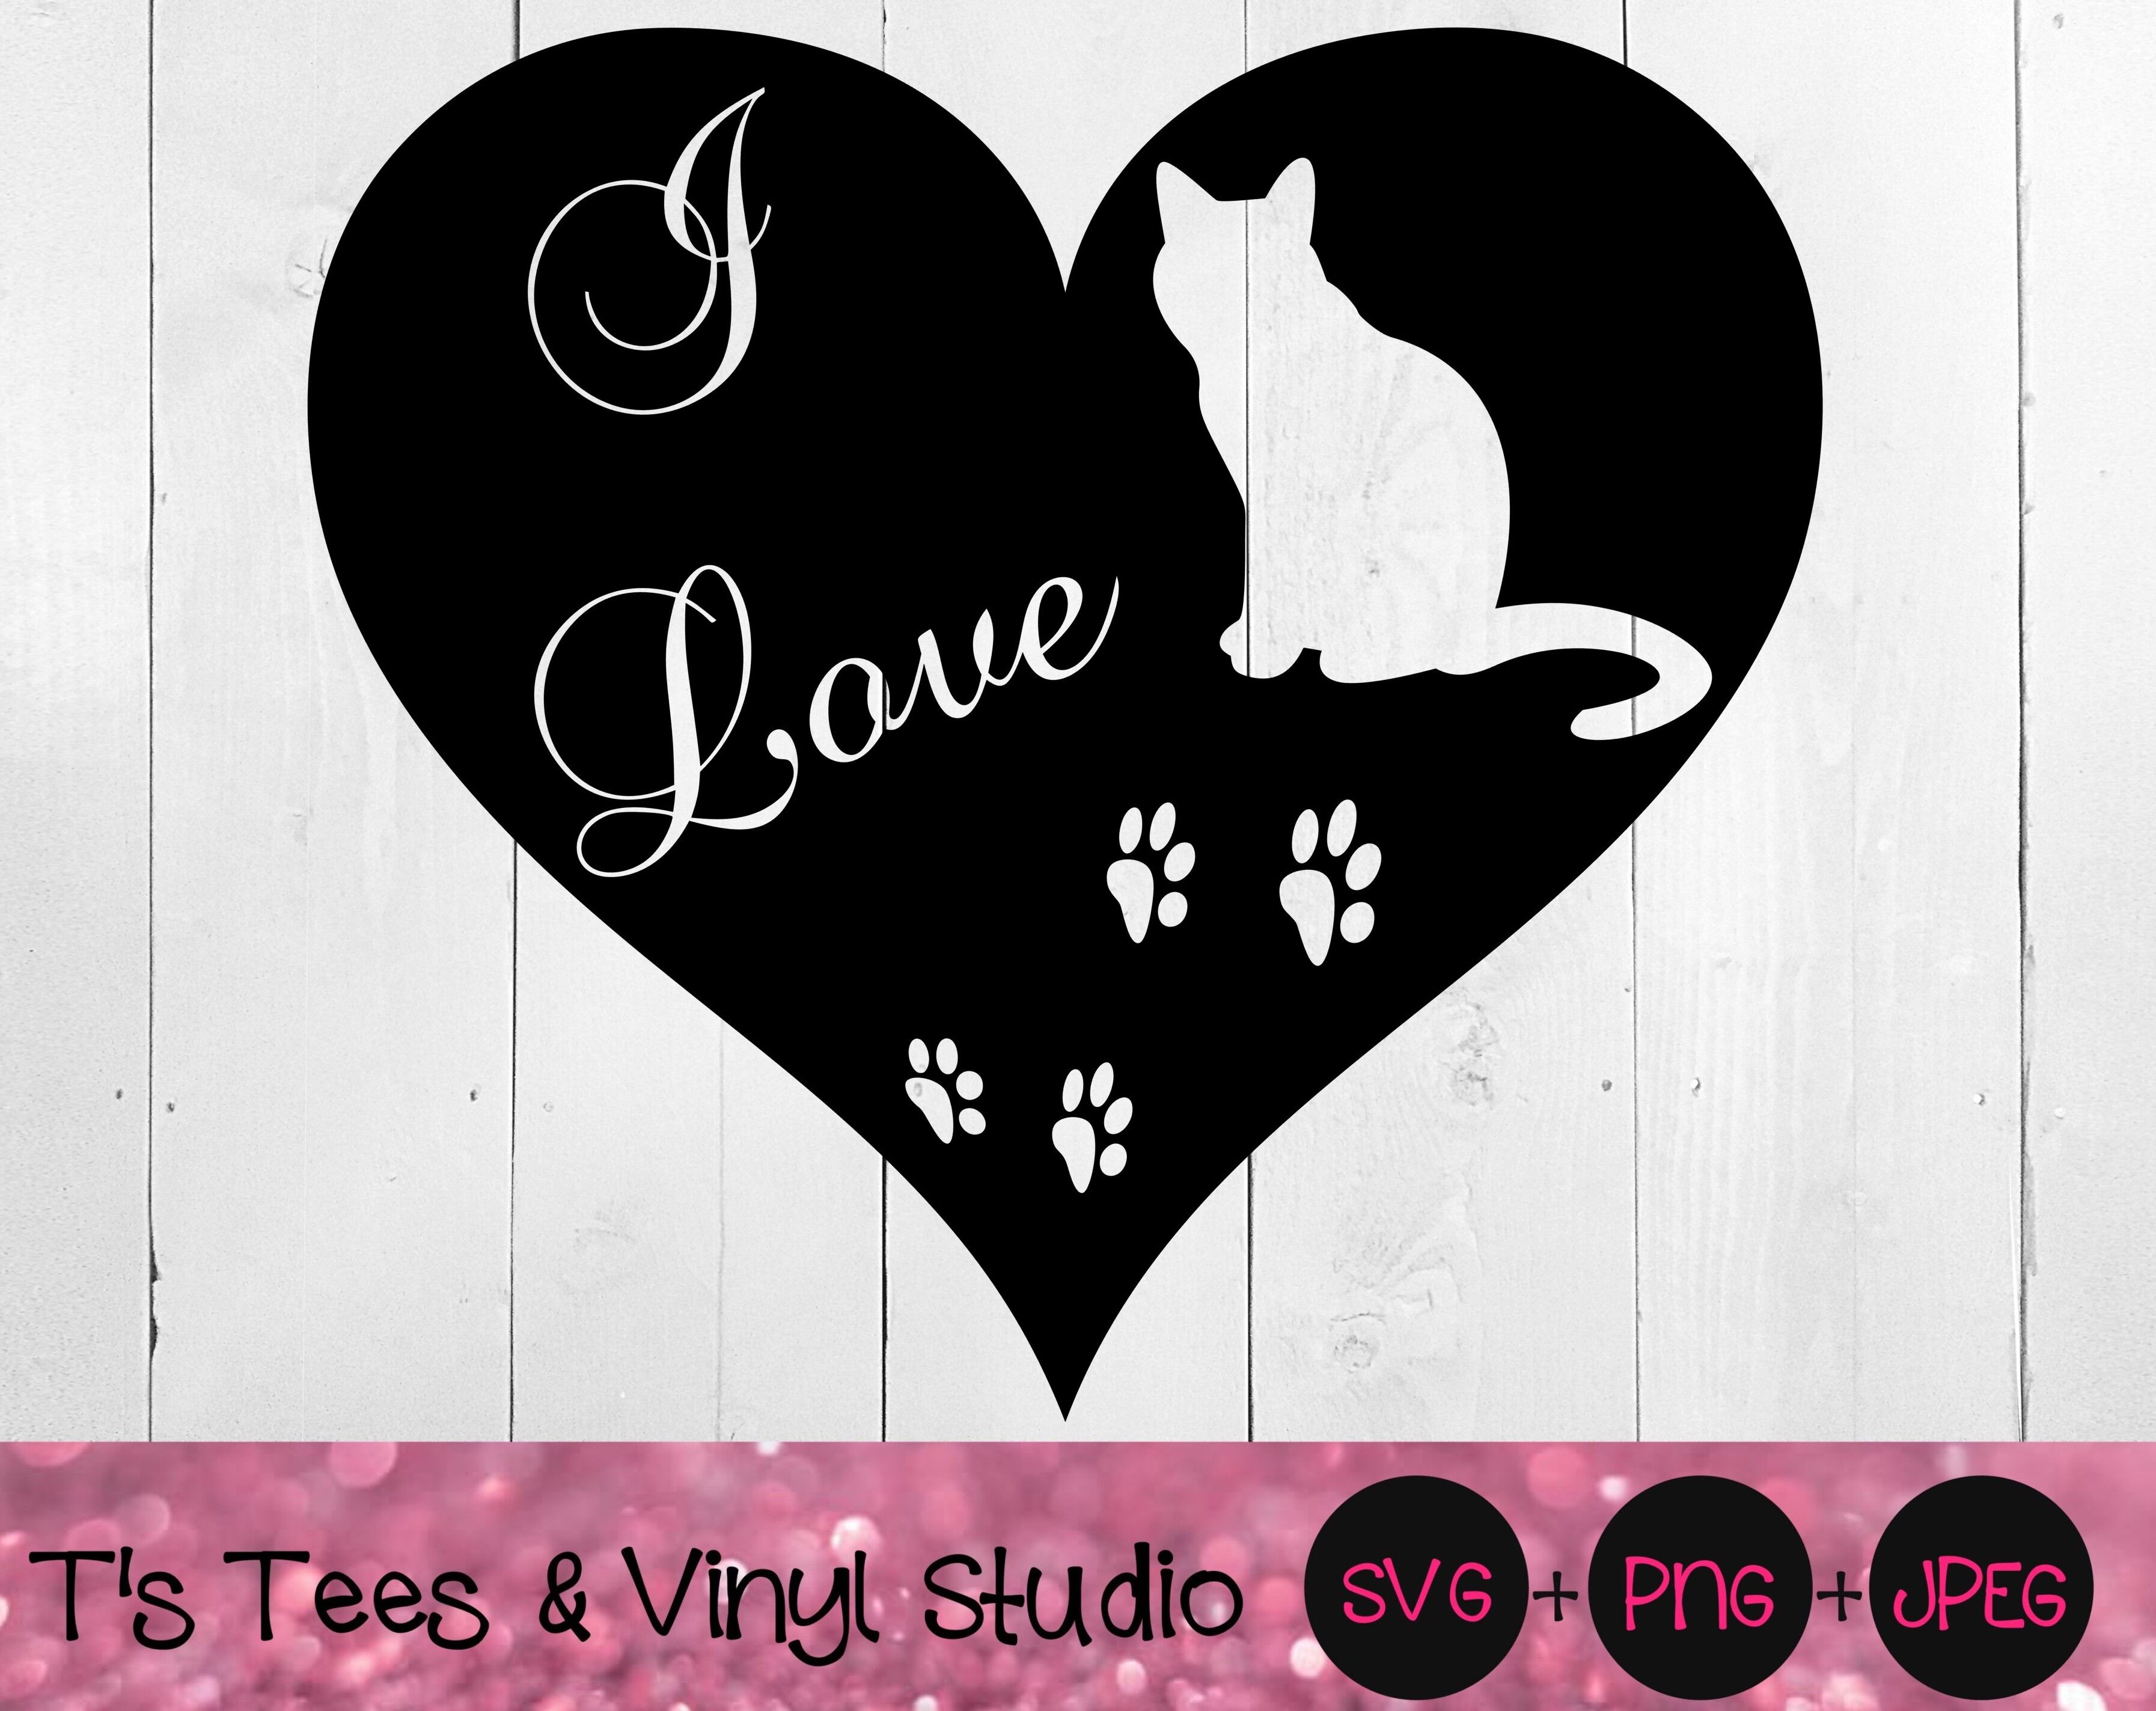 Download Cats Svg I Love Cats Svg Love Cats Svg Paw Print Svg Paw Prints Sv By T S Tees Vinyl Studio Thehungryjpeg Com SVG, PNG, EPS, DXF File